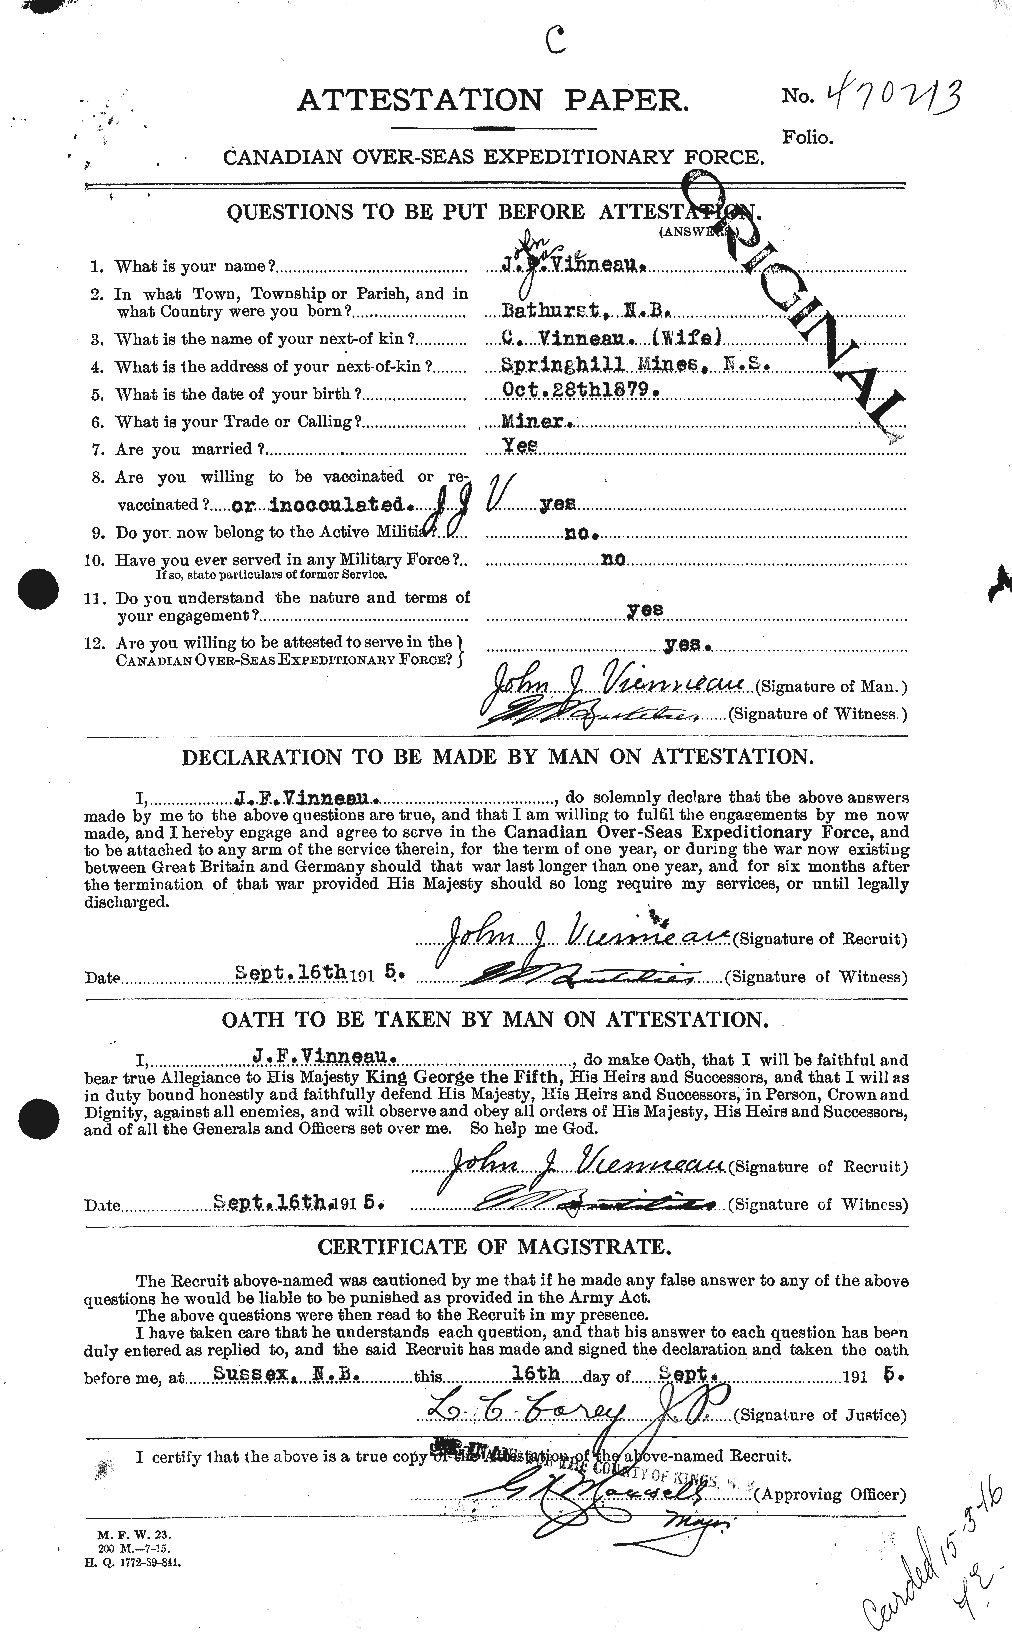 Personnel Records of the First World War - CEF 652378a